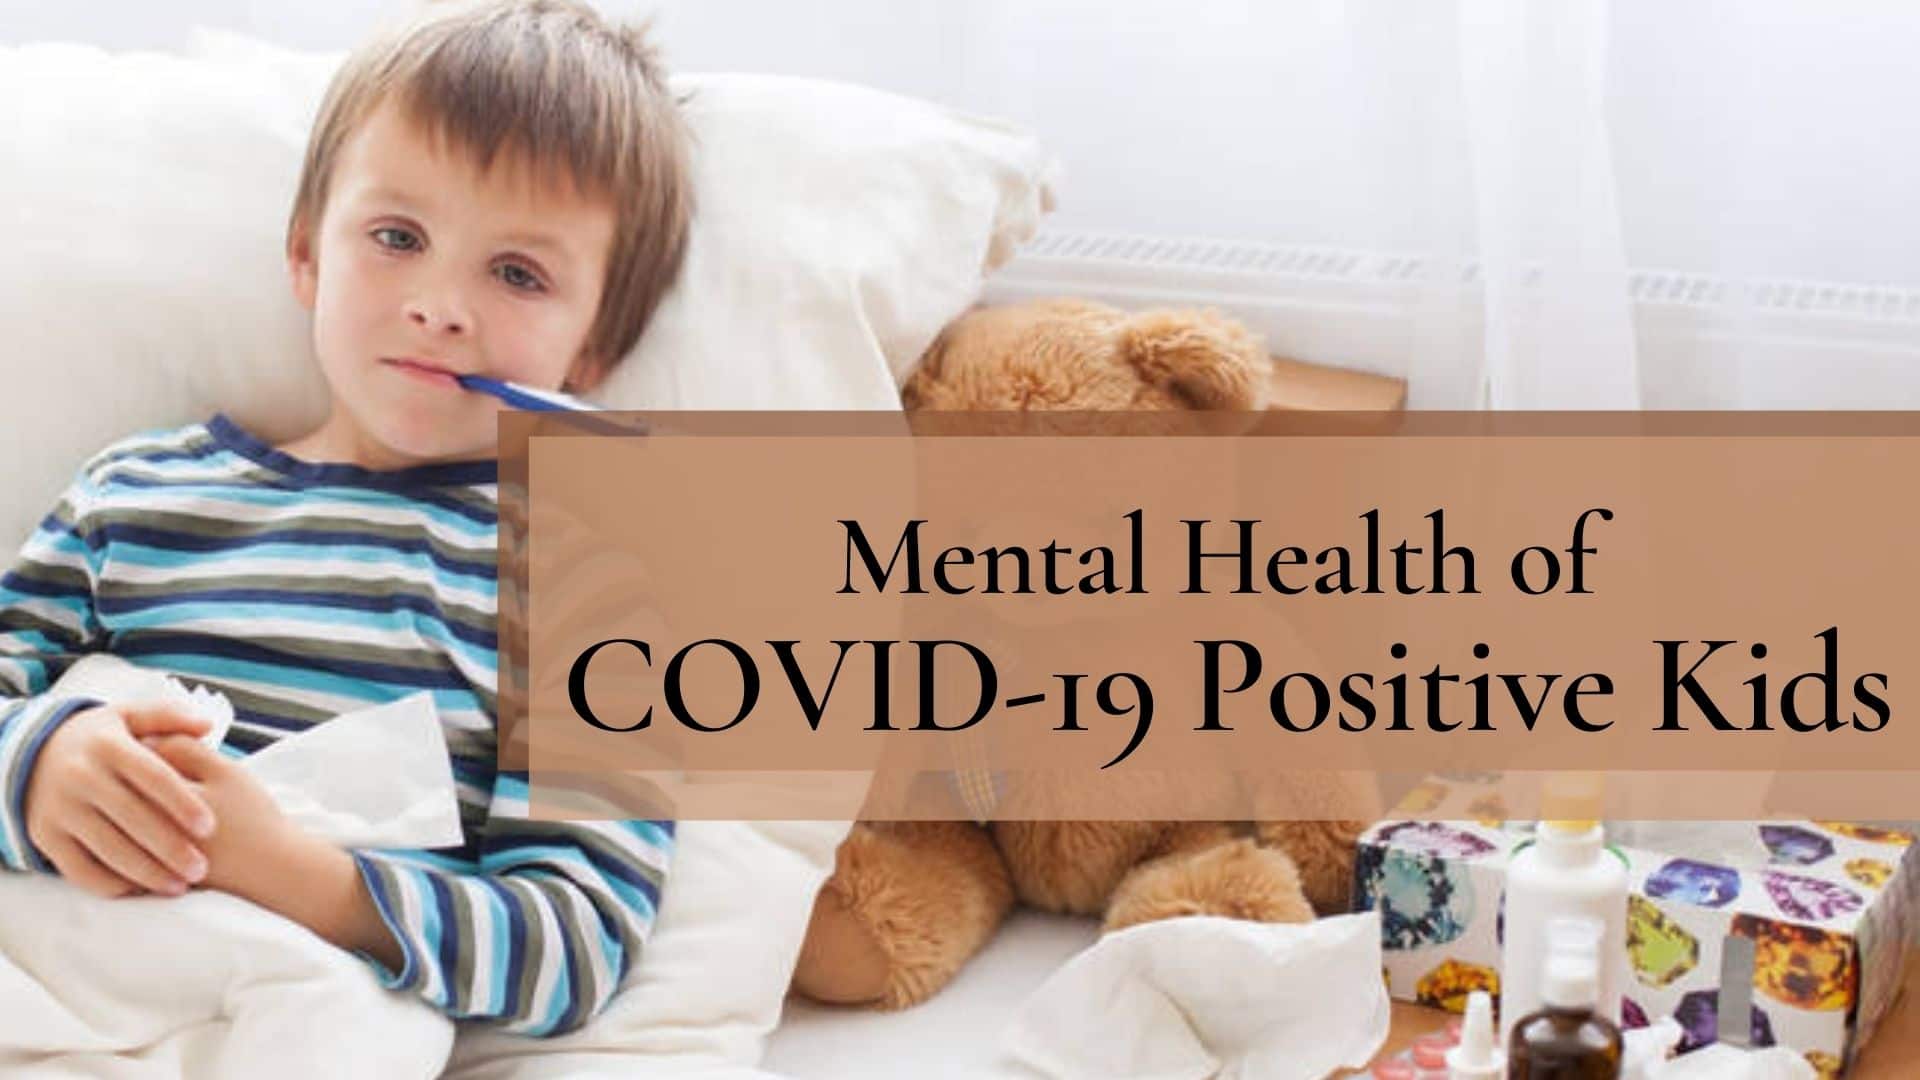 How To Boost Mental Health of COVID-19 Positive Kids: Doctor Shares Tips